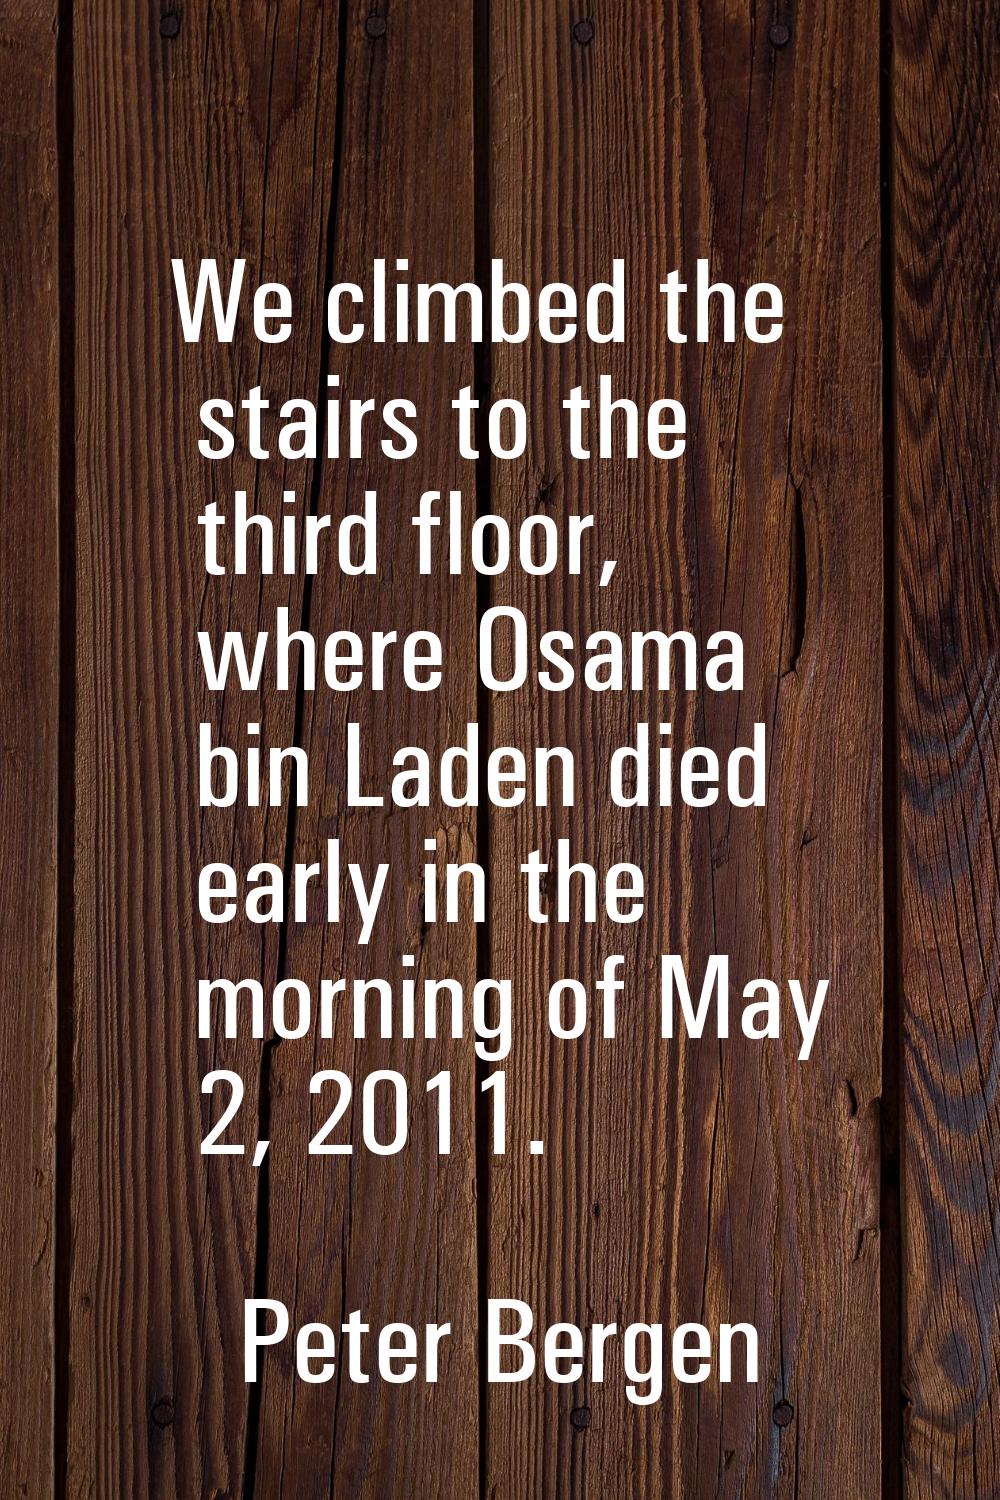 We climbed the stairs to the third floor, where Osama bin Laden died early in the morning of May 2,